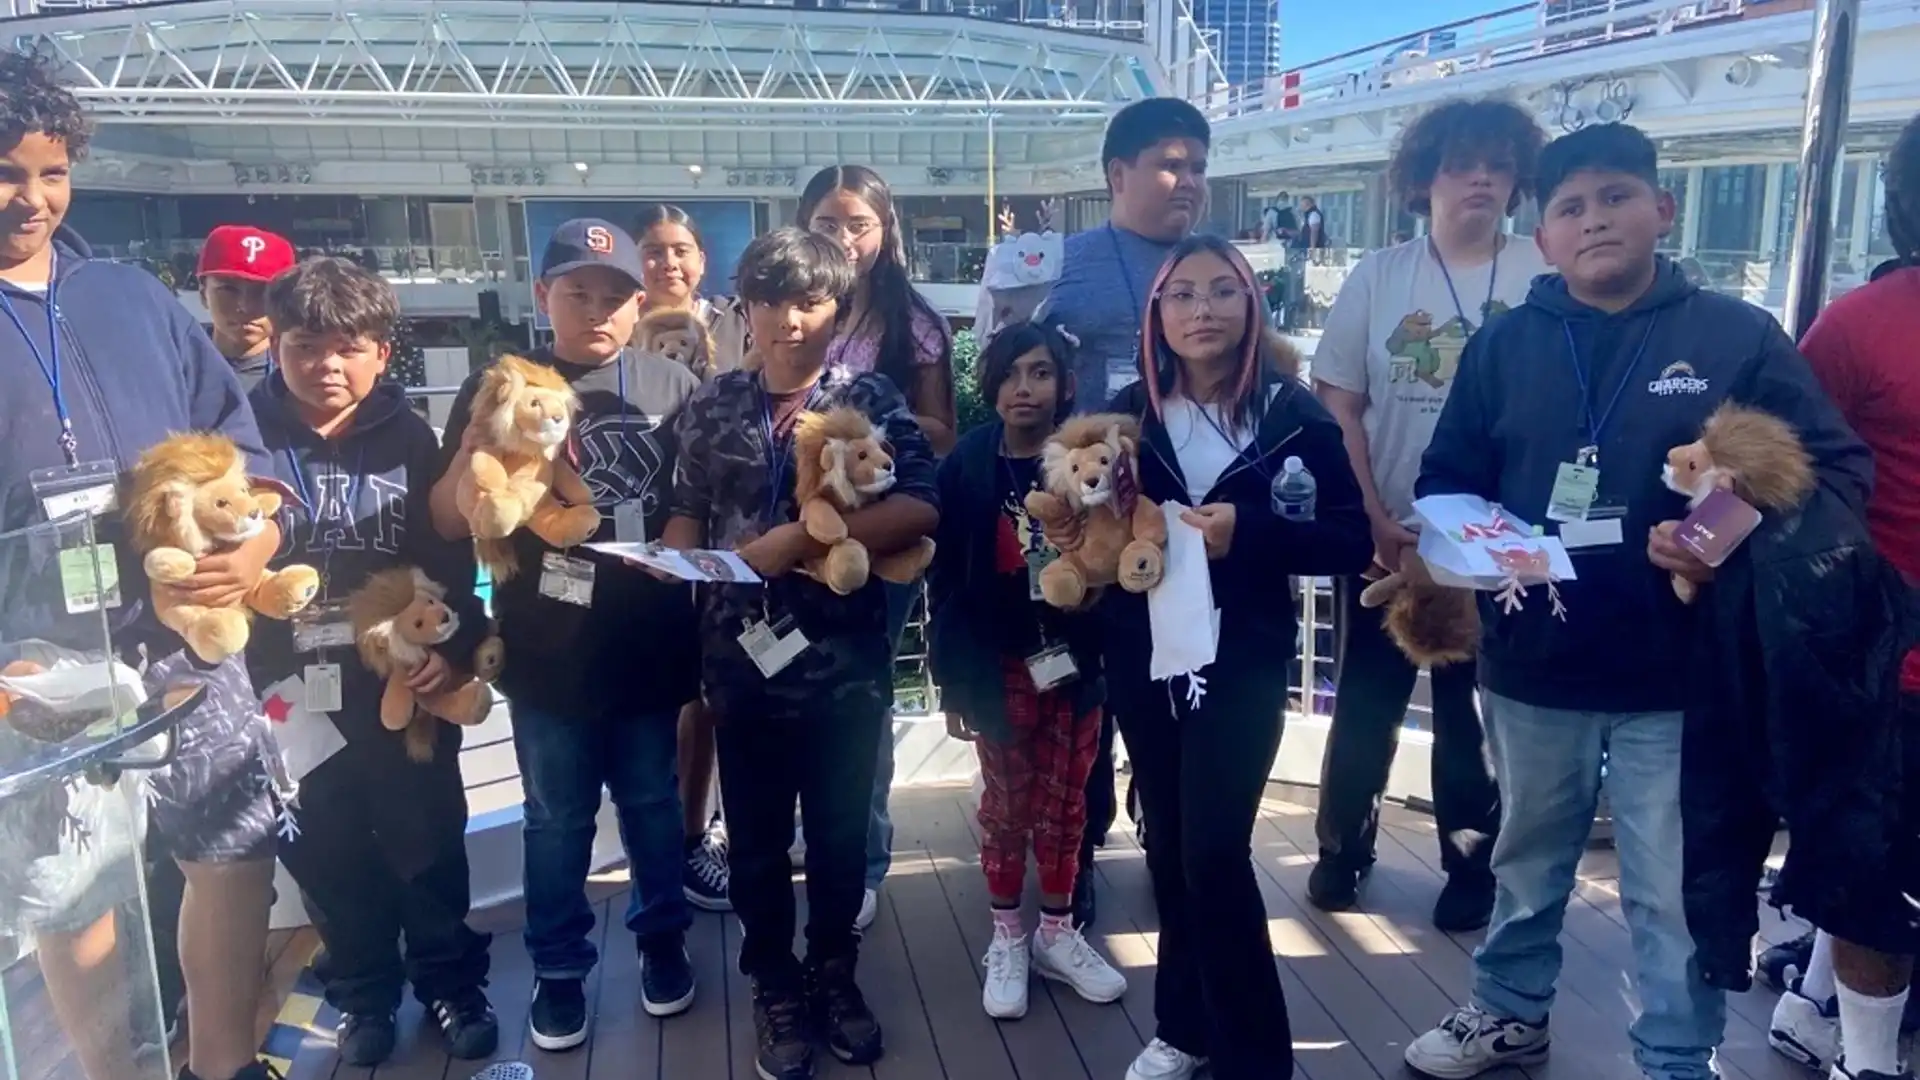 San Diego students gather on Holland America Line cruise ship, holding Lewie the Lion stuffed animals.